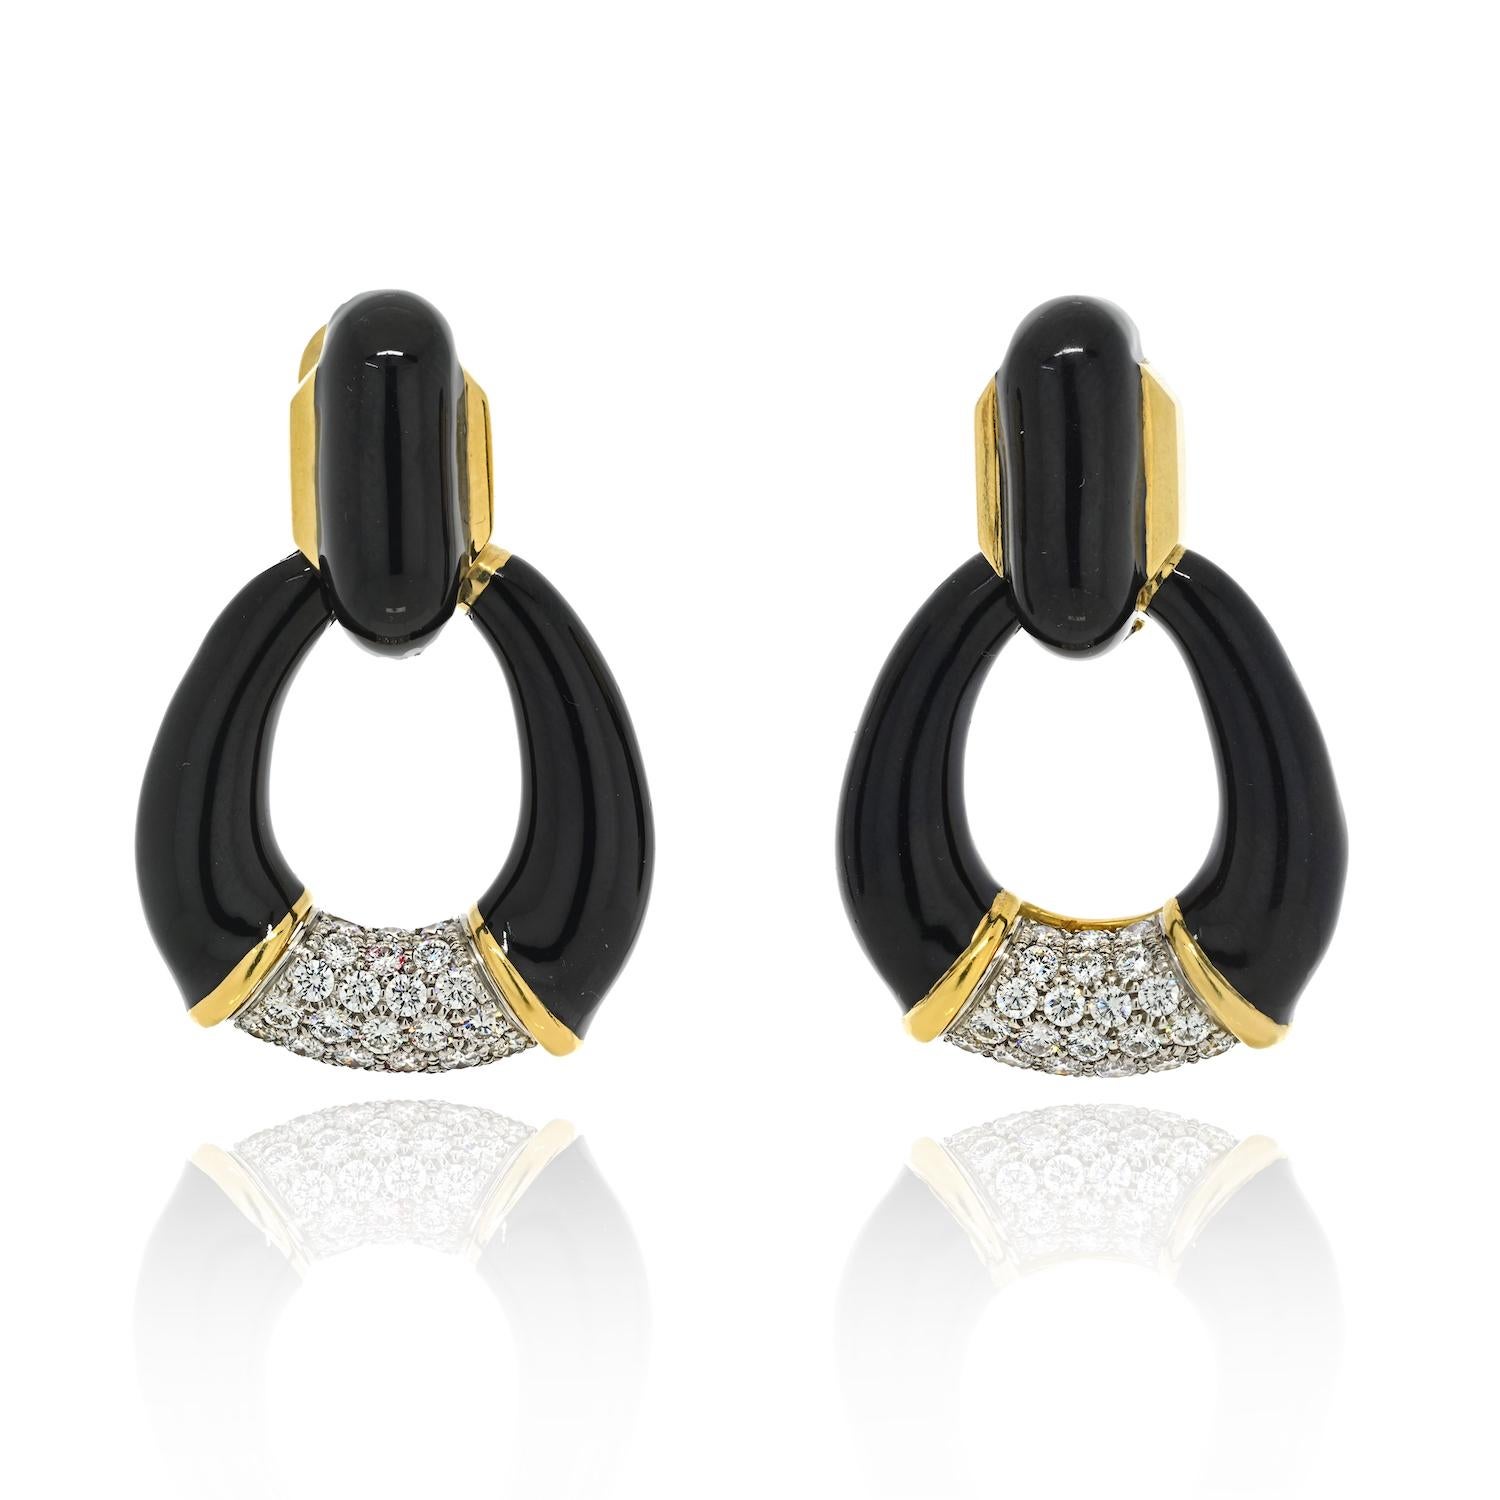 Prepare to make a bold and glamorous statement with these exquisite David Webb door knocker earrings. Crafted in 18k yellow gold and platinum, these earrings embody the iconic style and artistry for which David Webb is renowned.

The door knocker